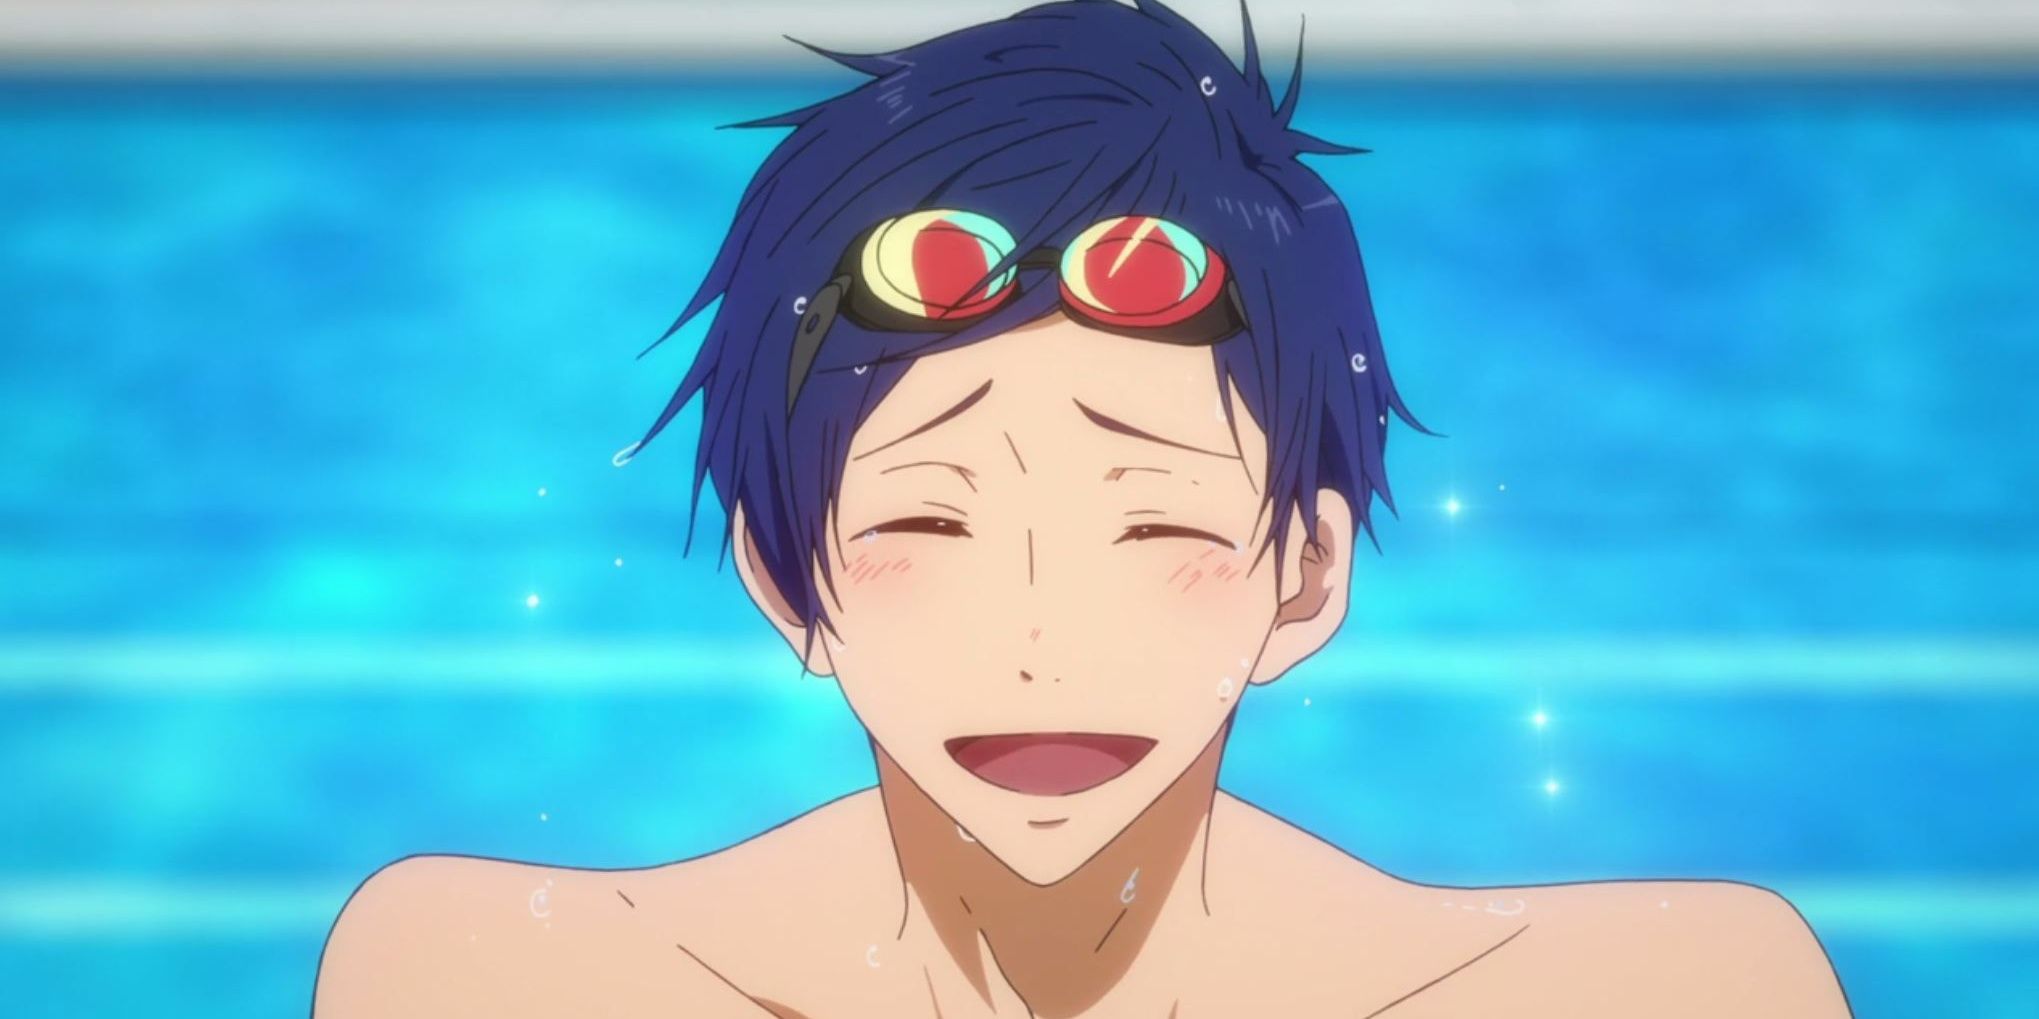 Rei from the Free anime, smiling